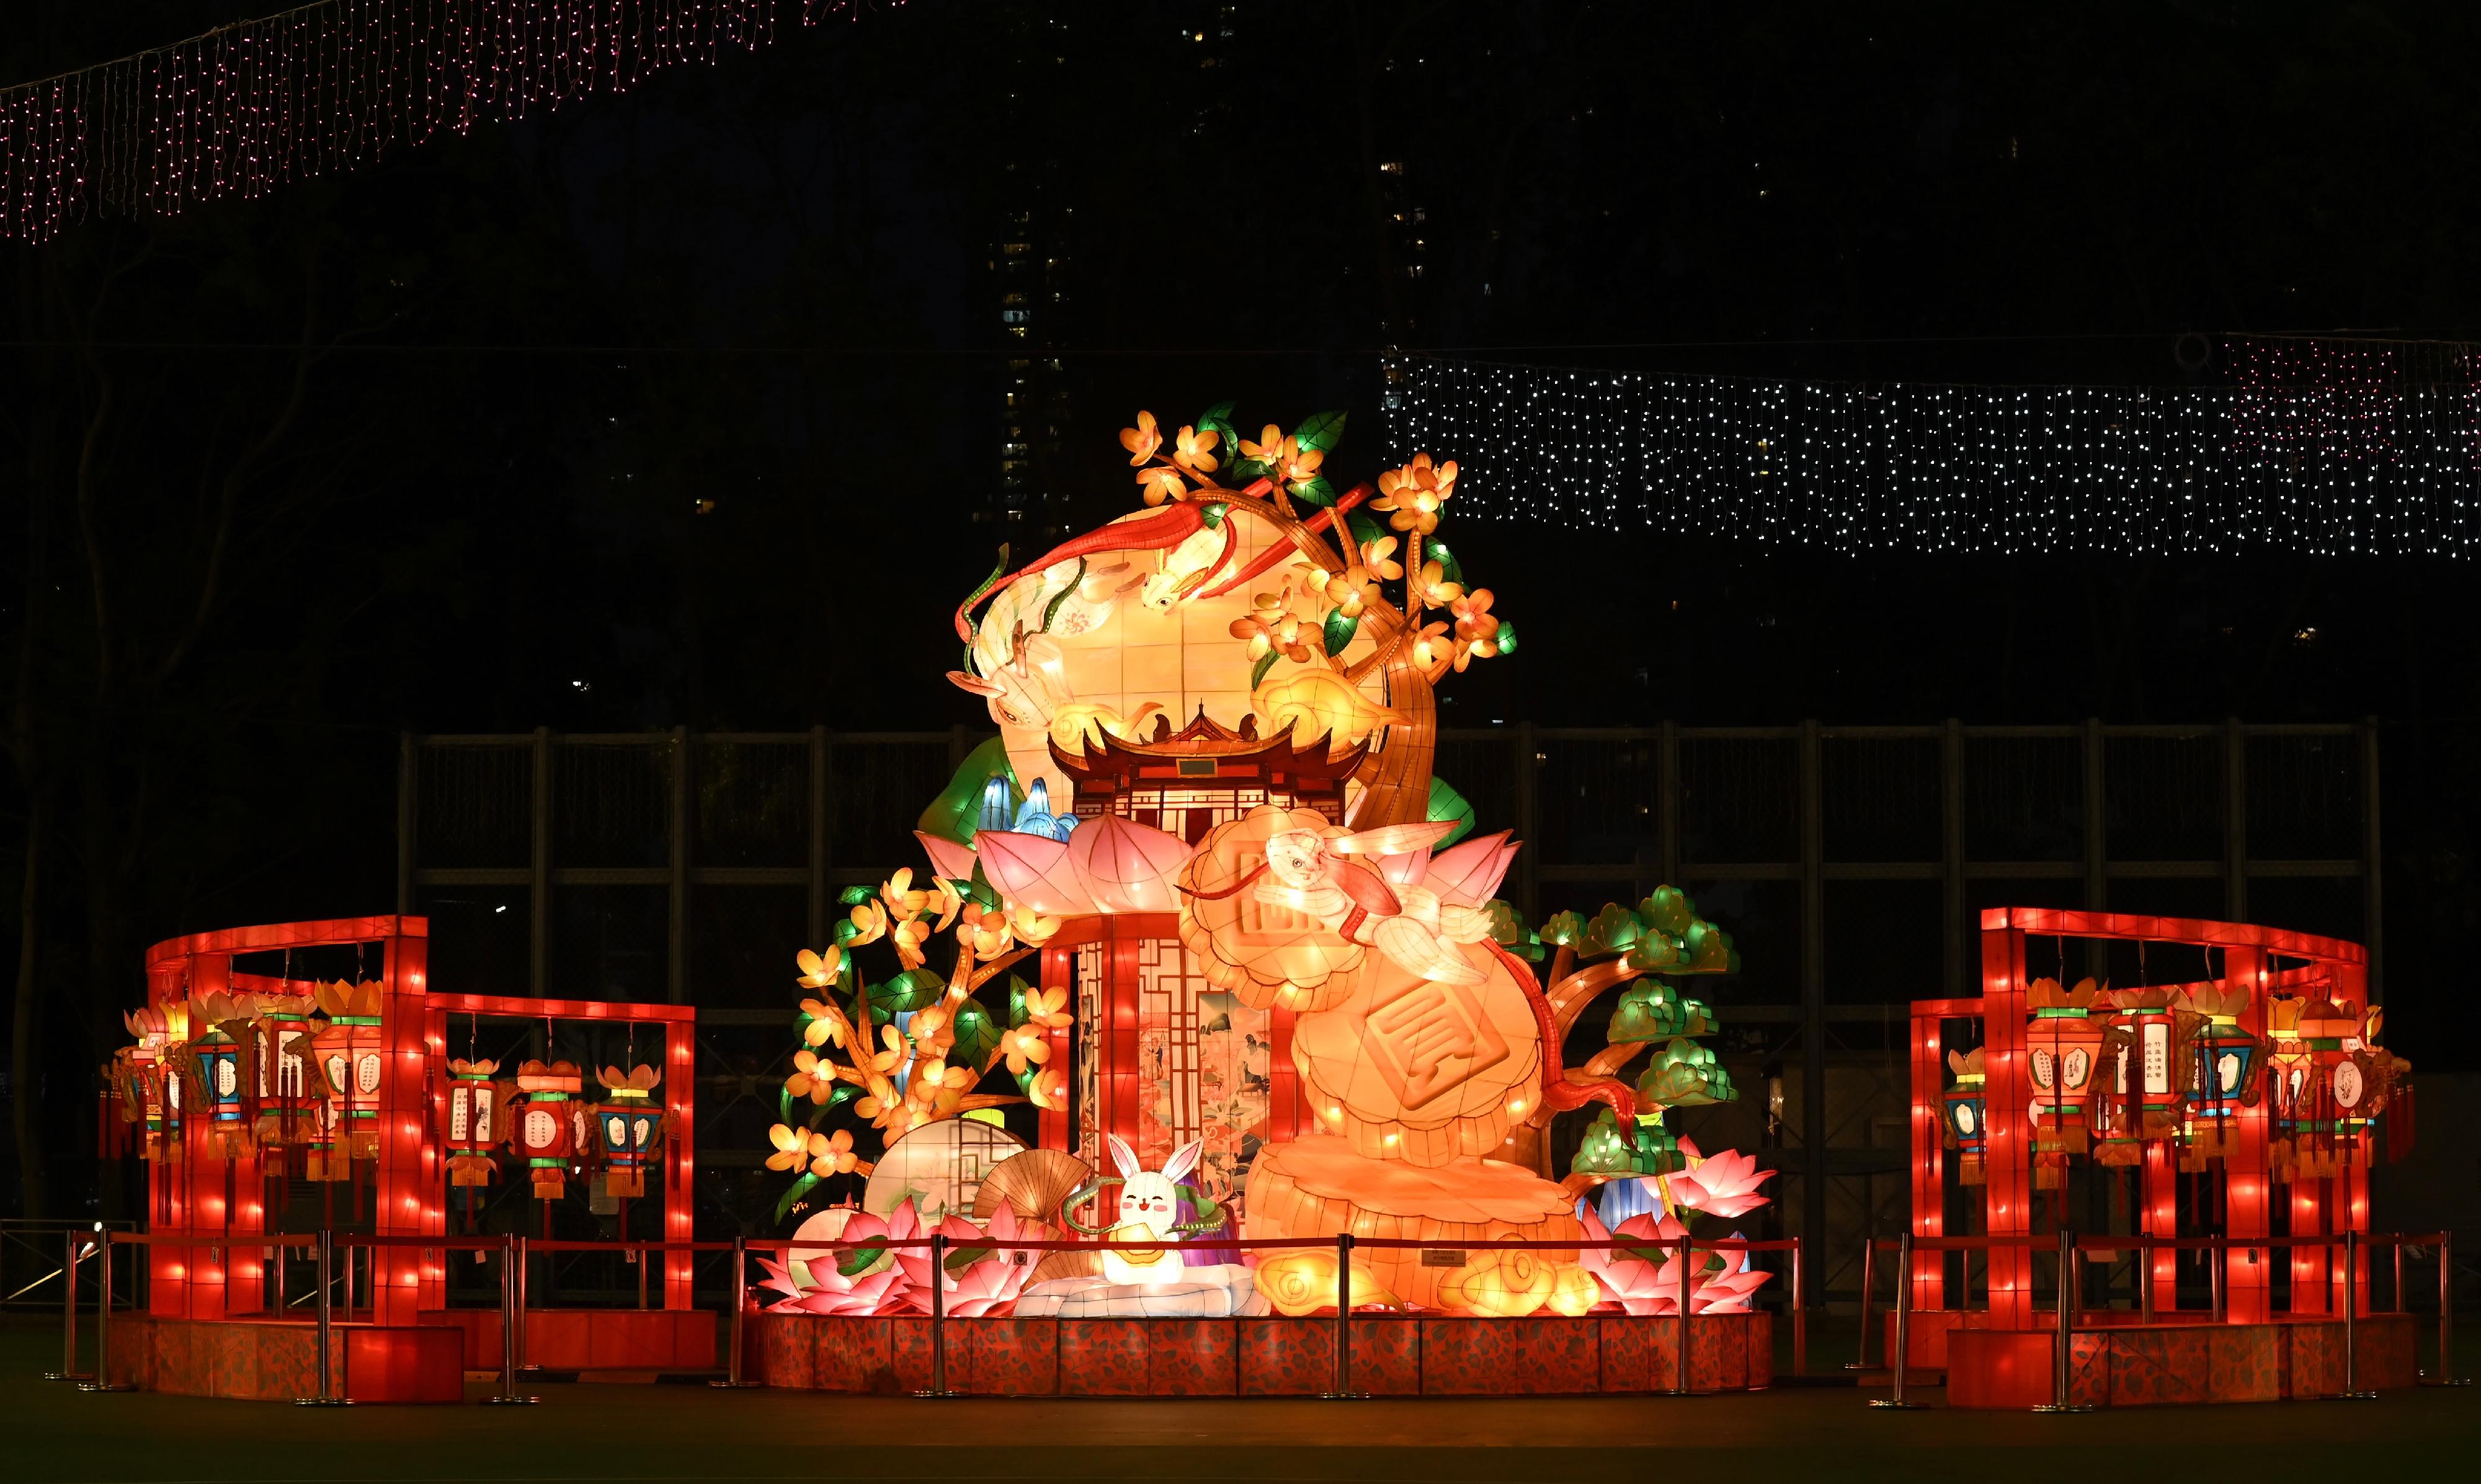 The Leisure and Cultural Services Department will showcase spectacular lantern displays of different themes at the Mid-Autumn Lantern Carnivals in Victoria Park, Sha Tin Park and Tuen Mun Park from tomorrow (September 23) until October 2. A vast range of activities will also be organised in the three parks at different dates. Photo shows the revolving lantern "Autumn's Moonlit Charm" created by Foshan masters at Victoria Park.